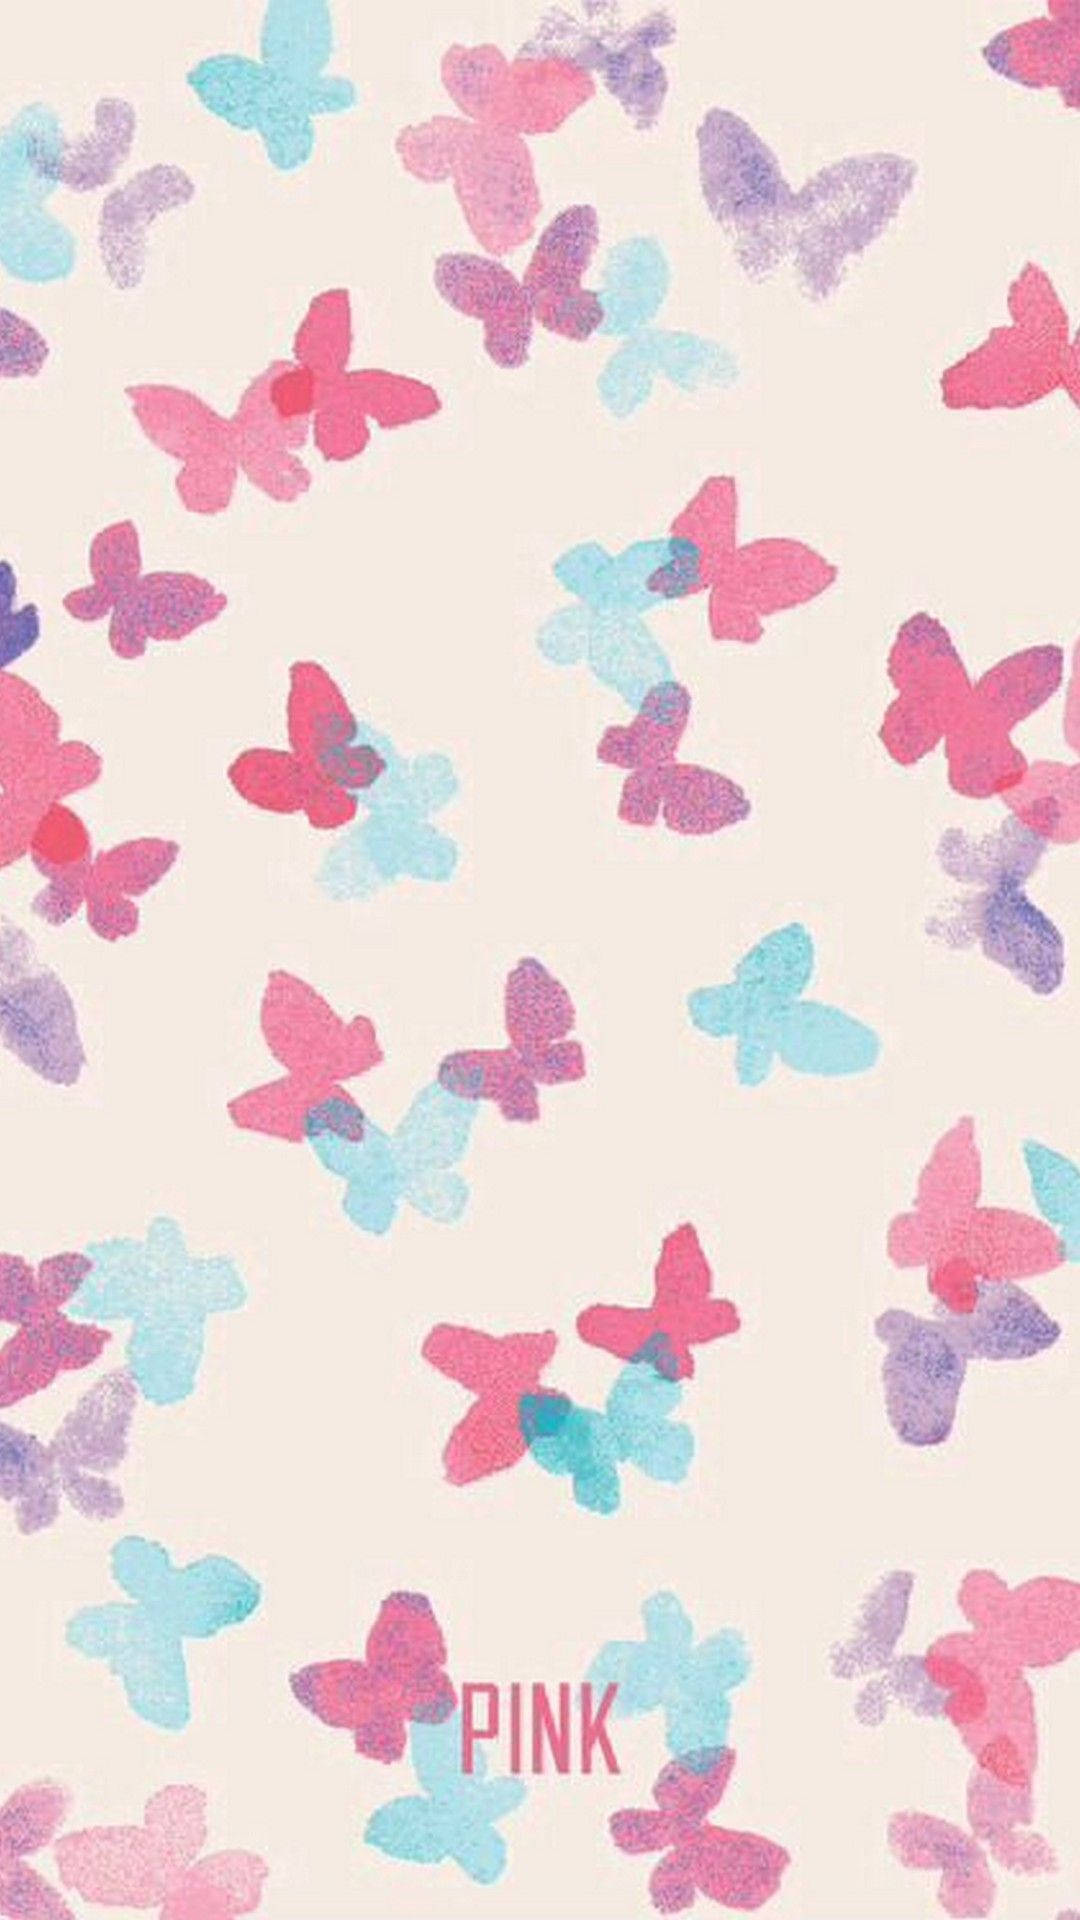 Aesthetic Girly Multicolored Butterflies Wallpaper